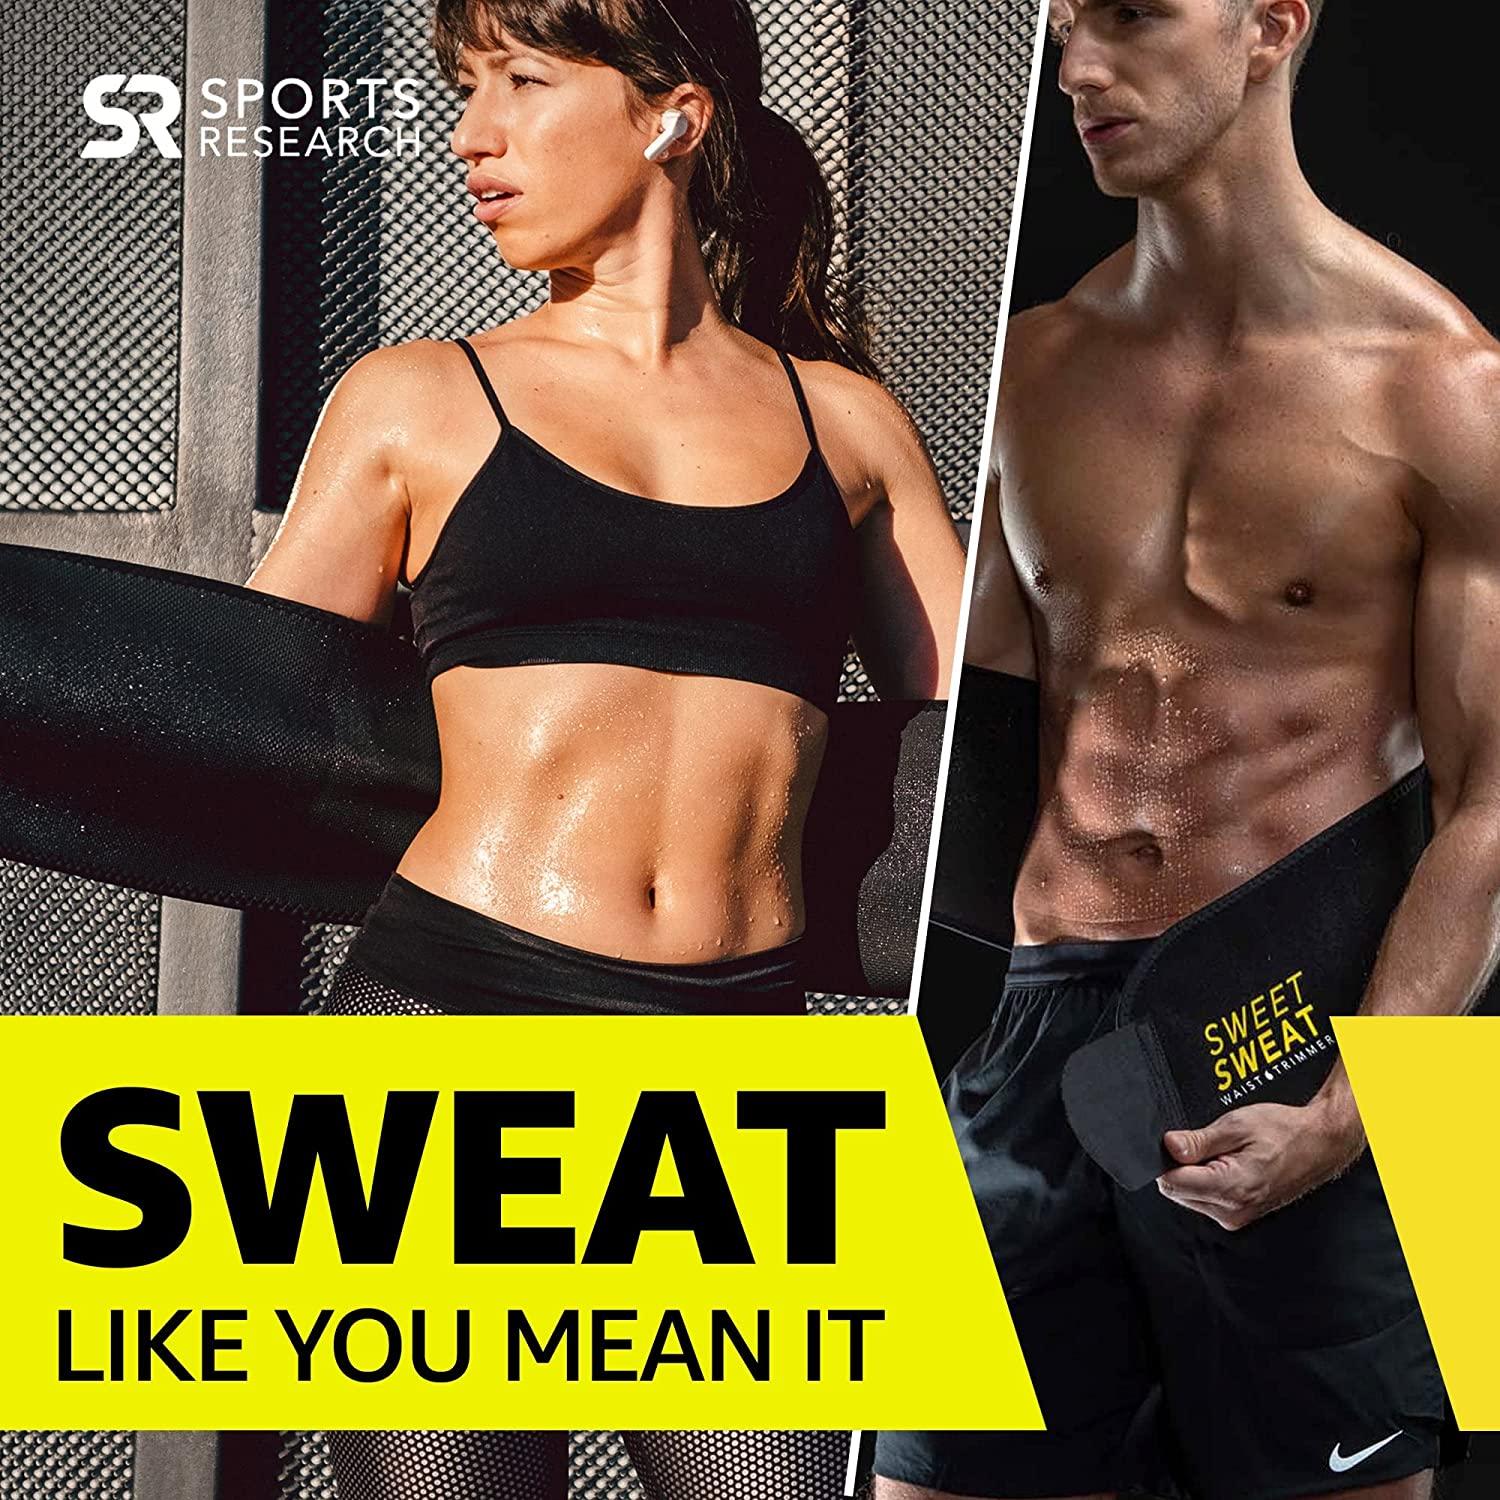 Do Waist Trimmer Sweat Belts work WITHOUT Exercise? LOOSE SKIN, Sweet Sweat